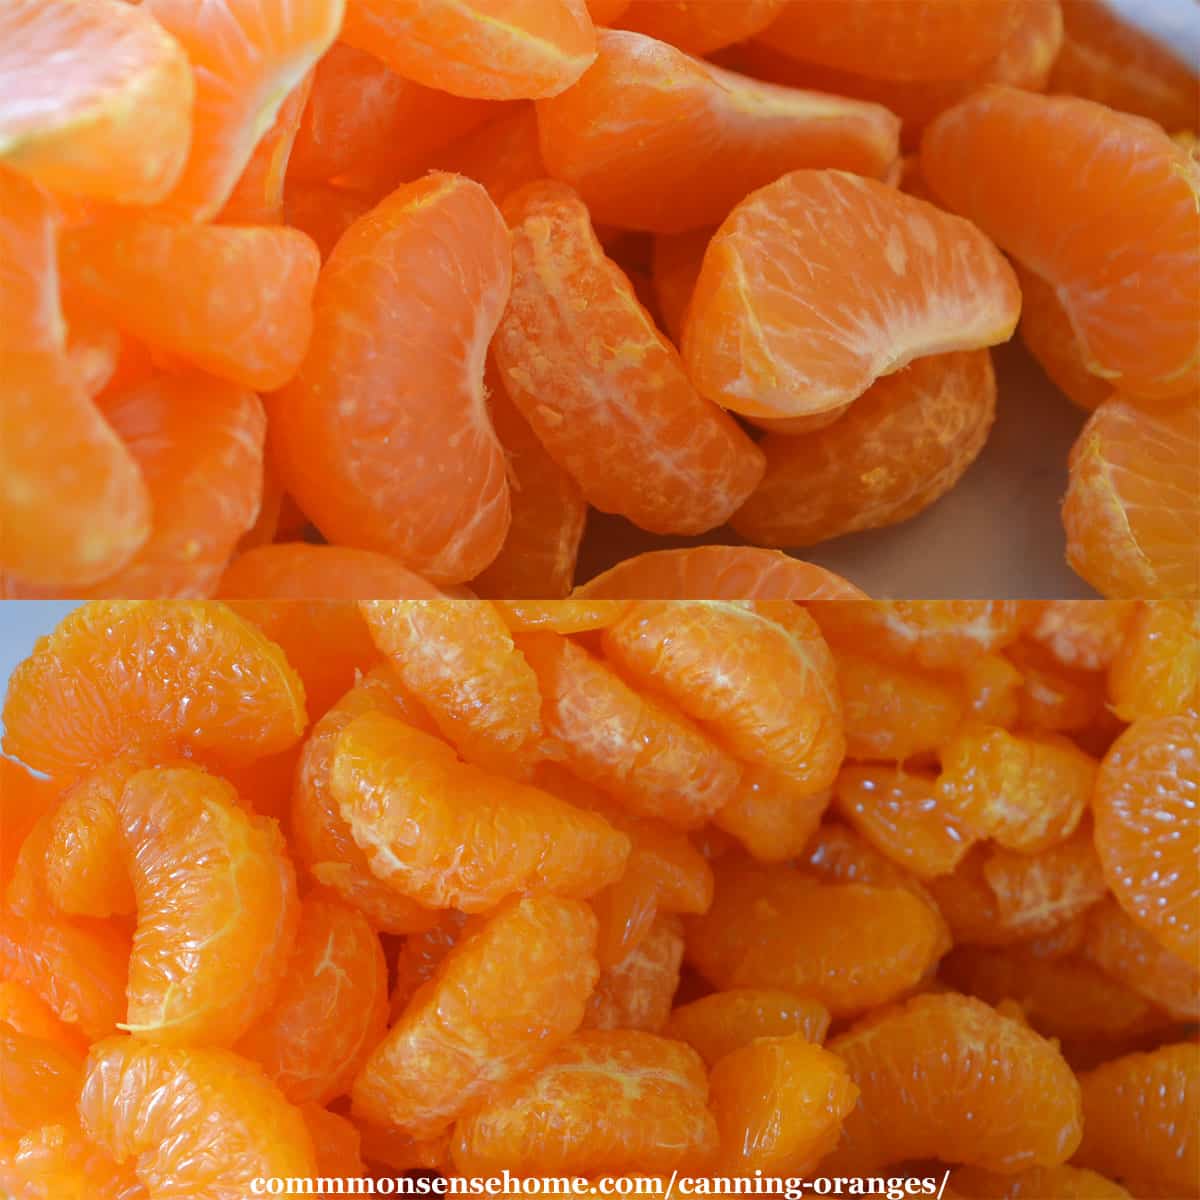 orange segments with and without membranes